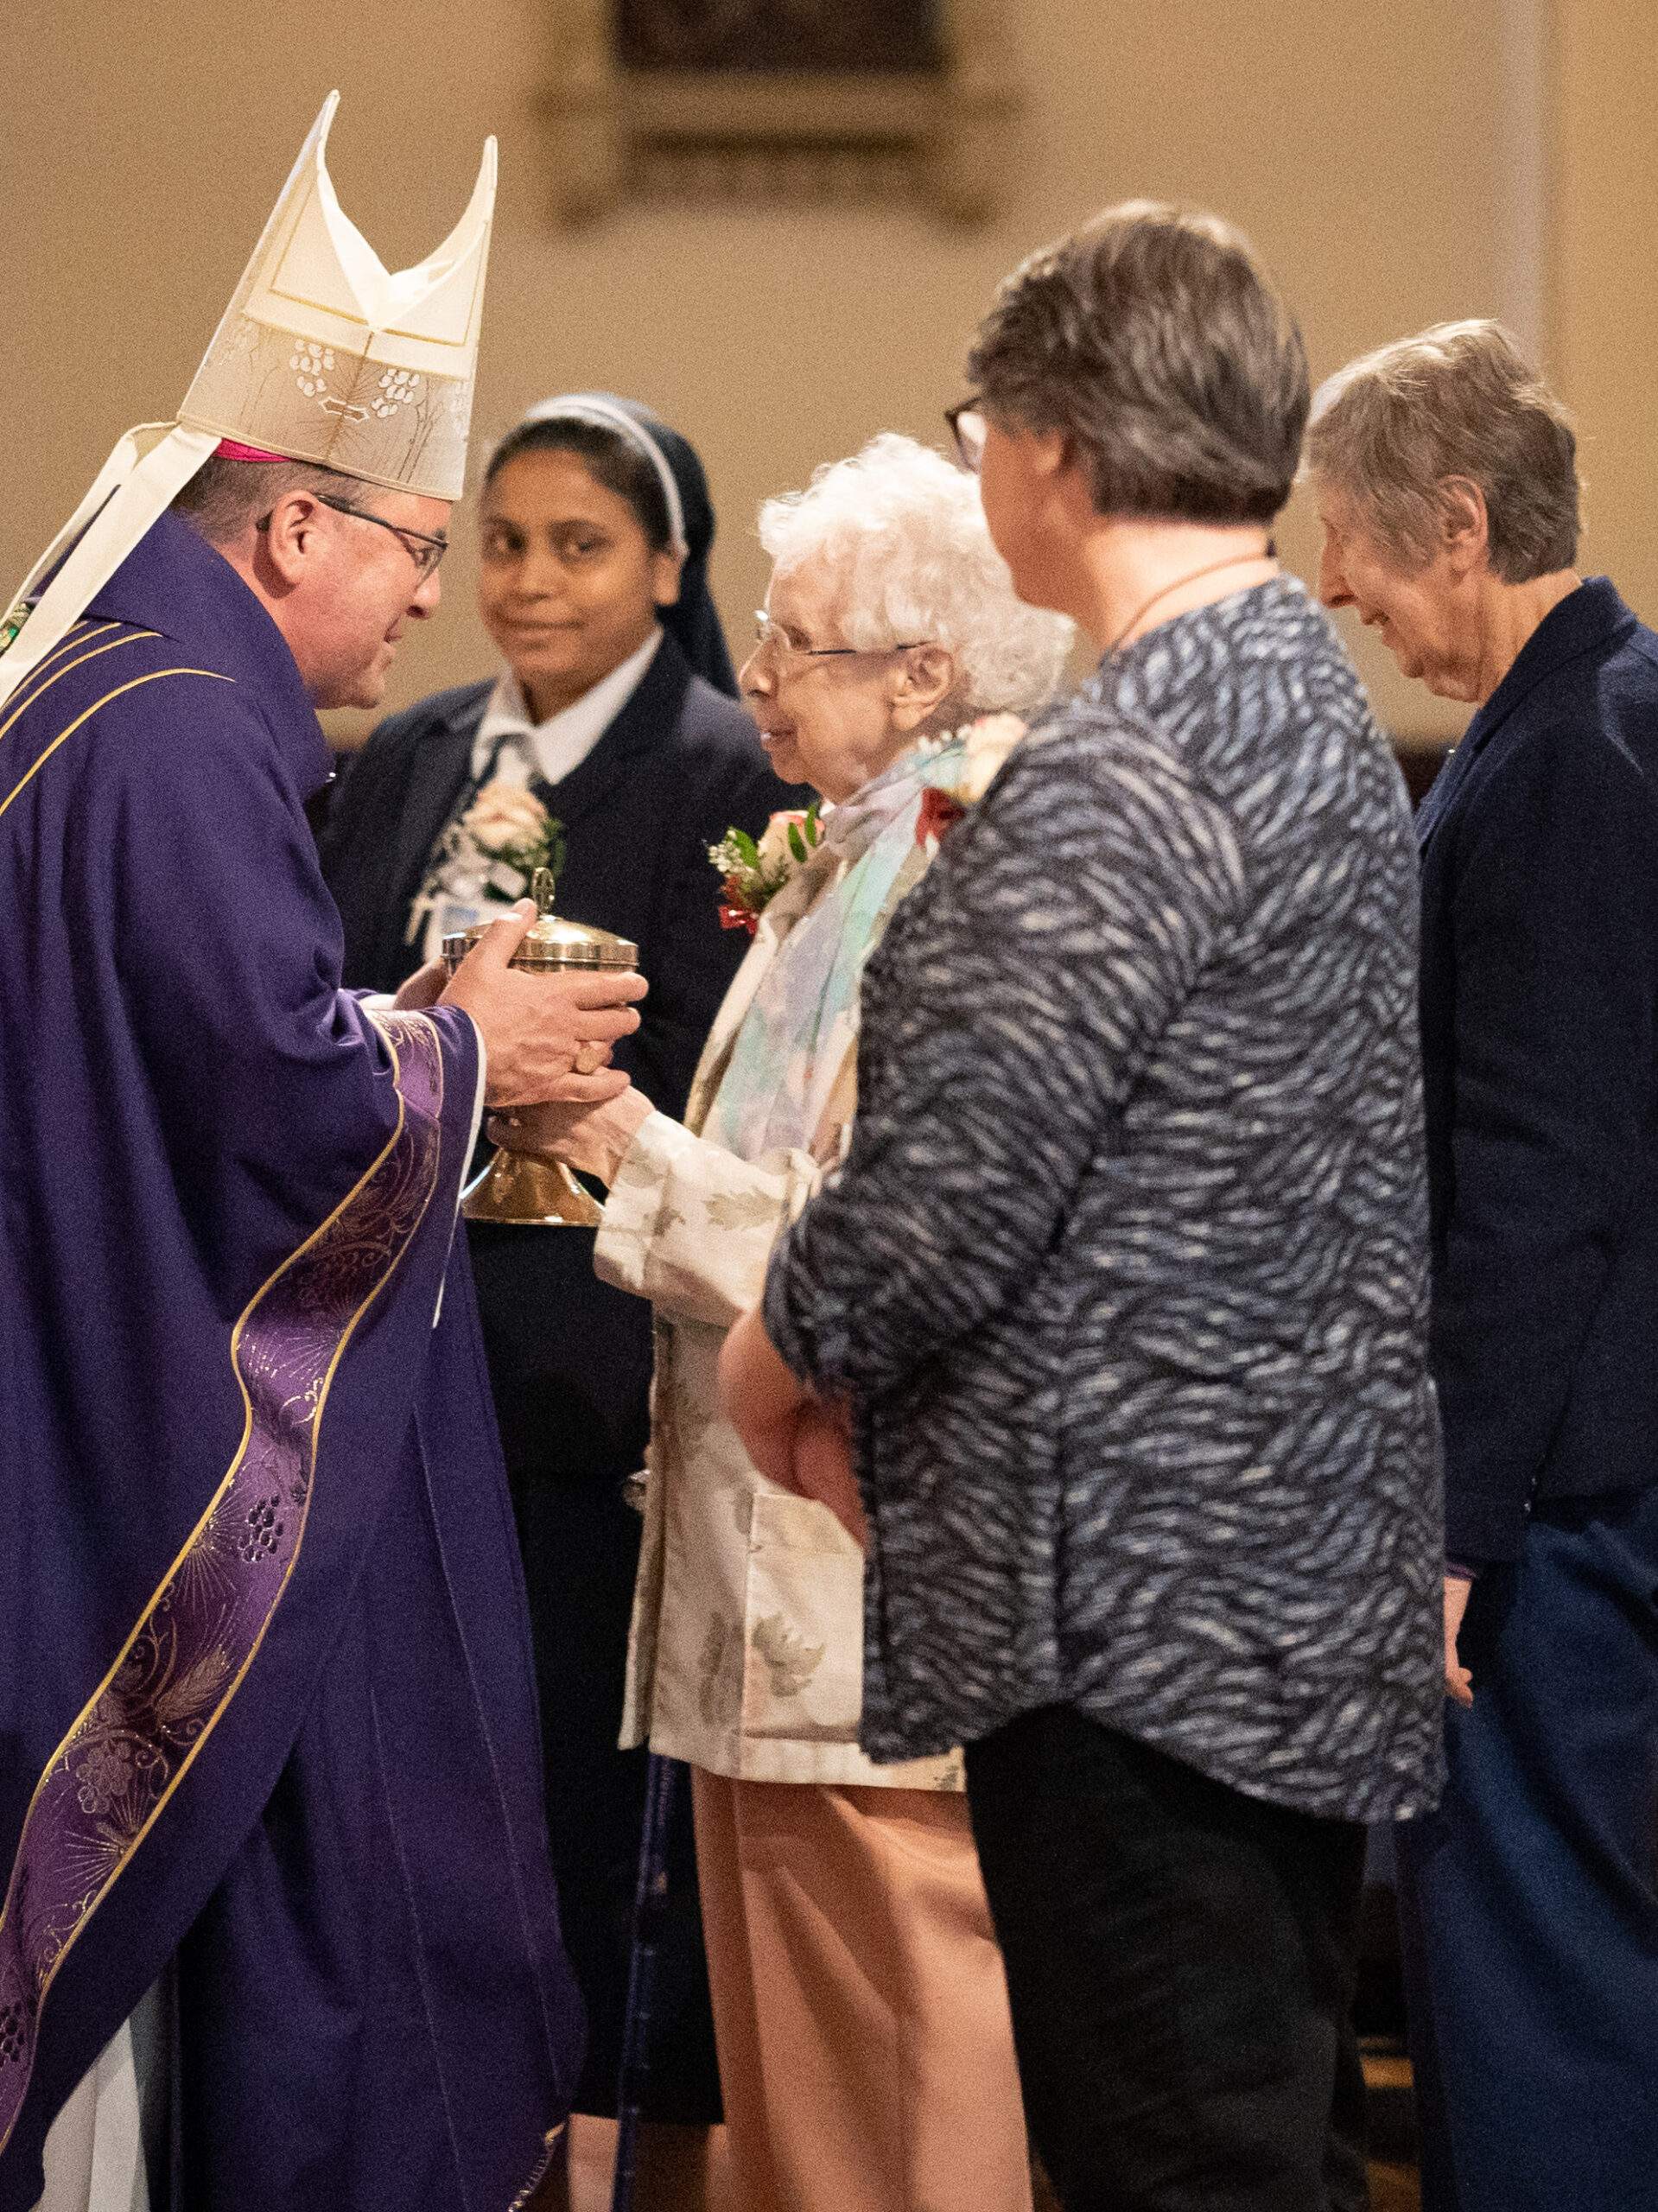 Sister Margaret Mary Siegfried, who celebrated her 80th jubilee this year, presented the gifts at the Jubilarian Mass.